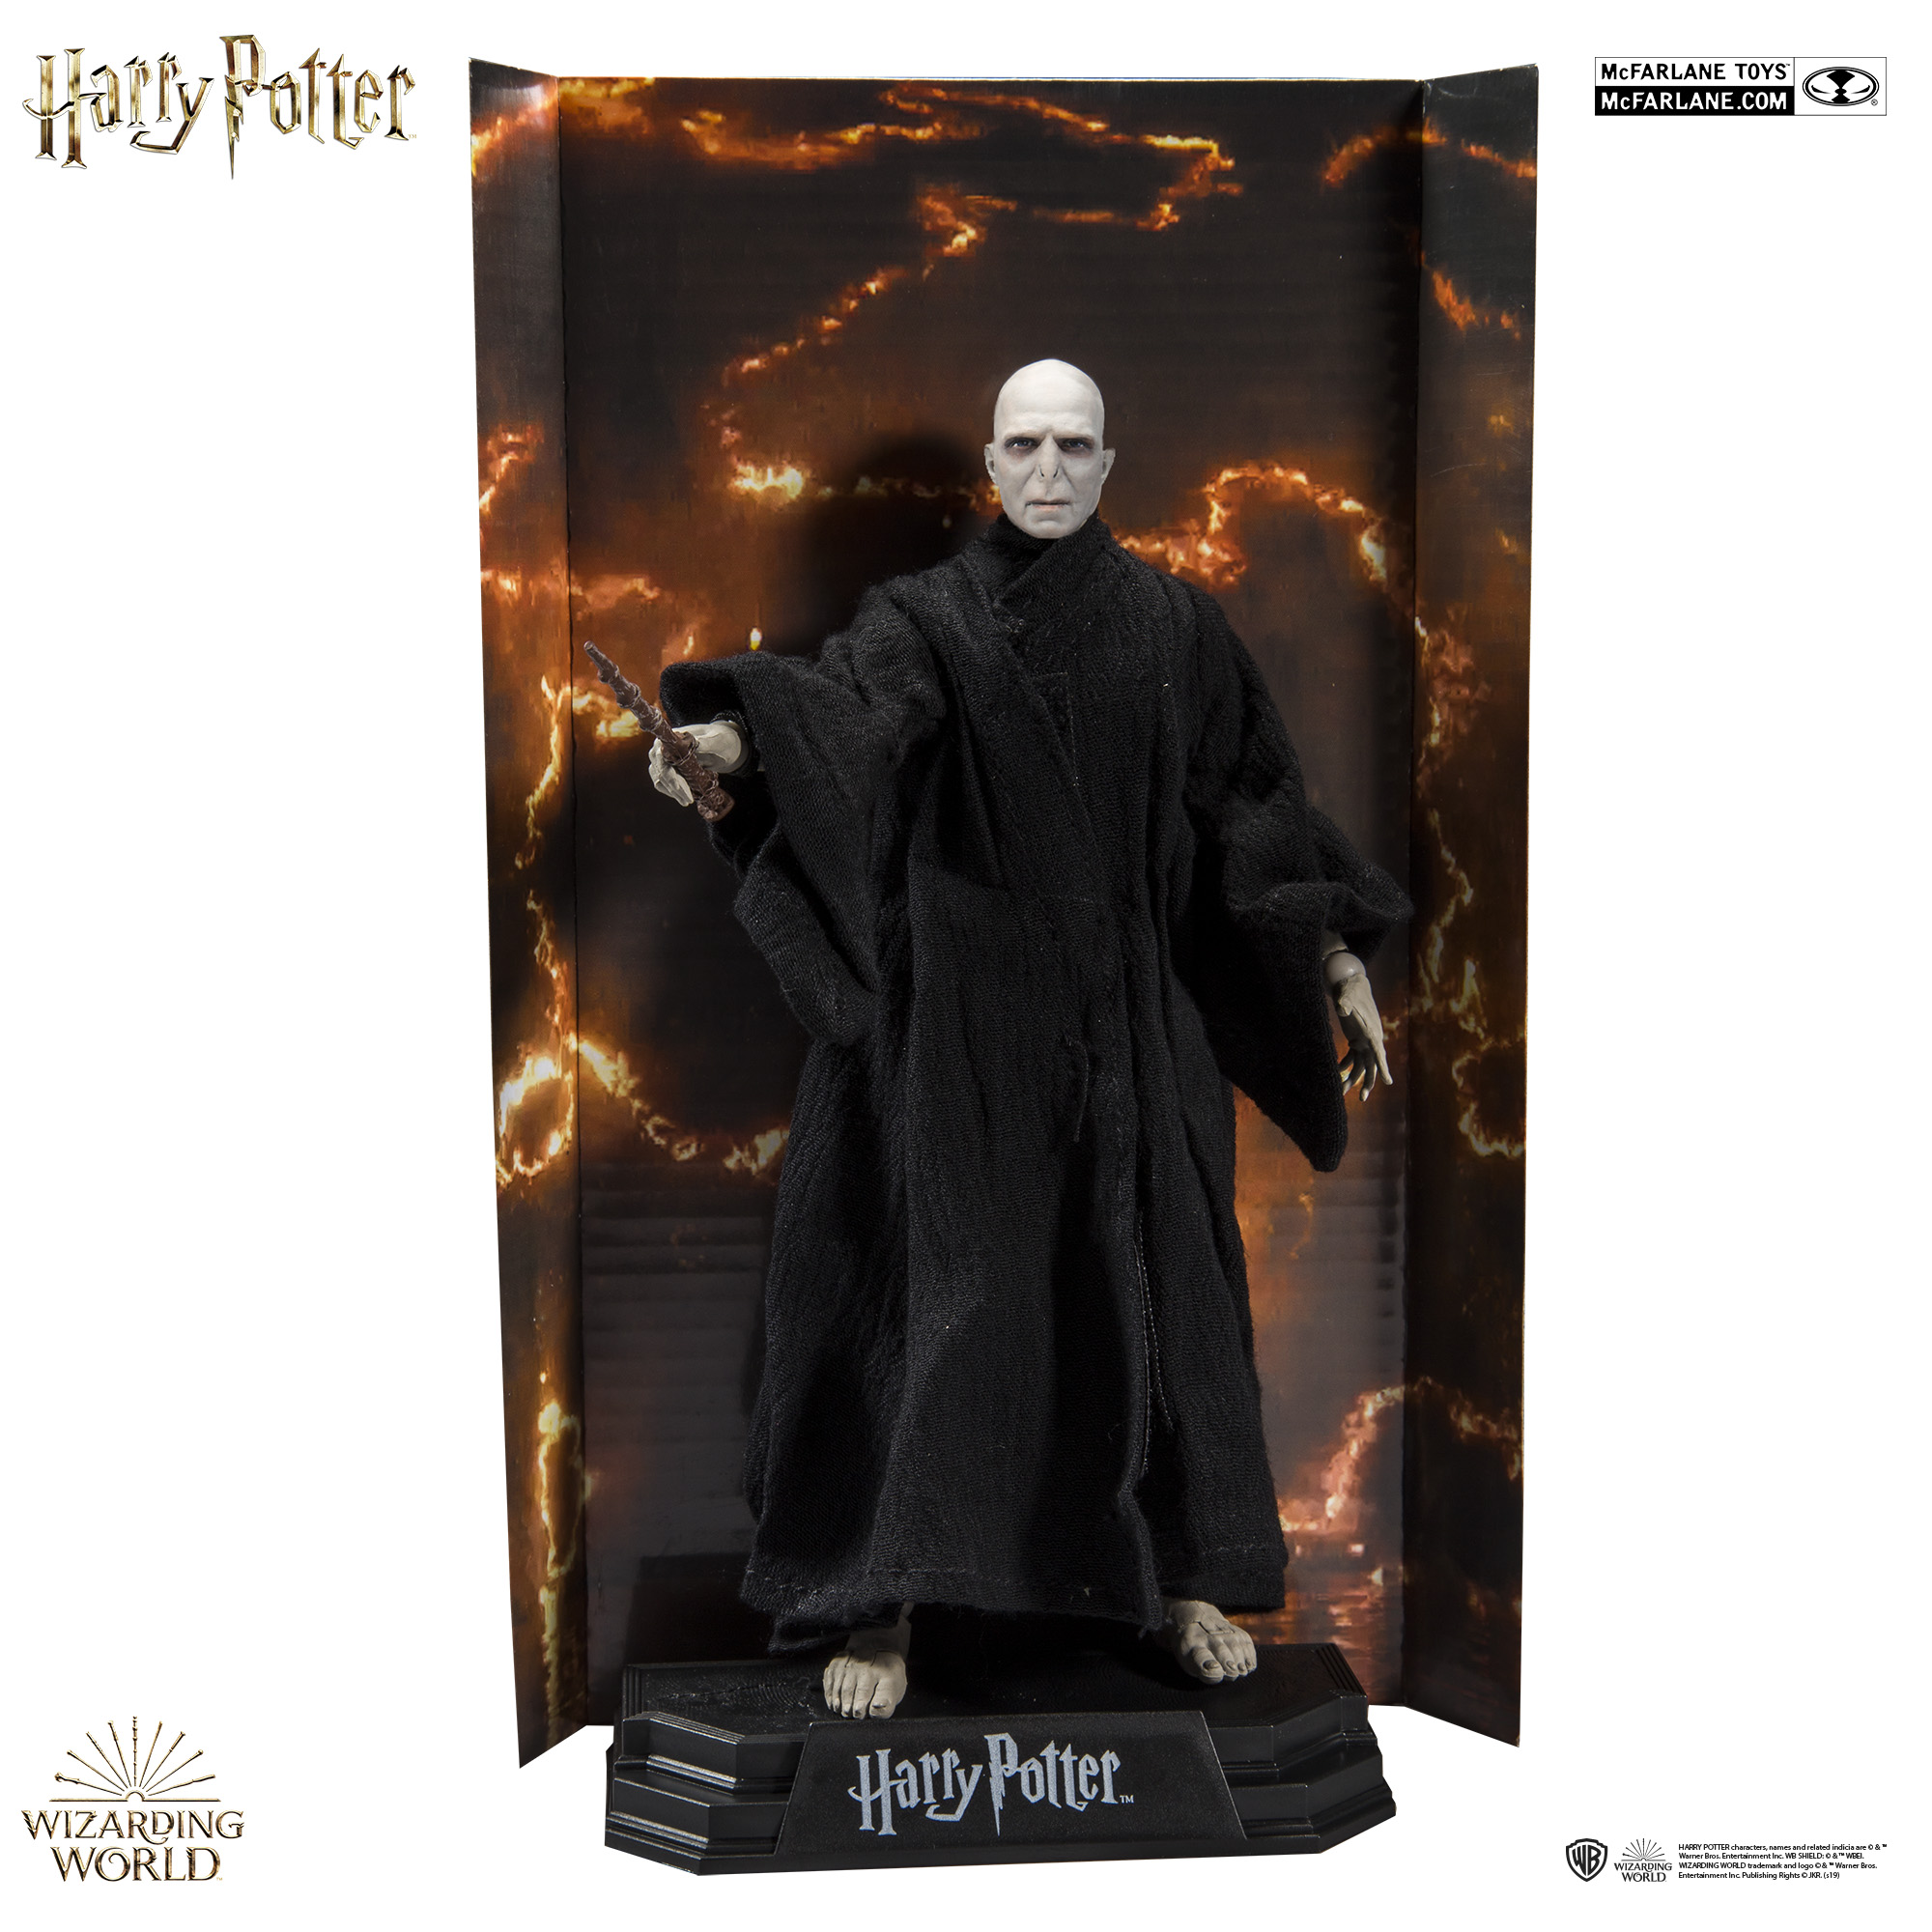 HARRY POTTER 7" LORD VOLDEMORT ACTION FIGURE MCFARLANE TOYS 